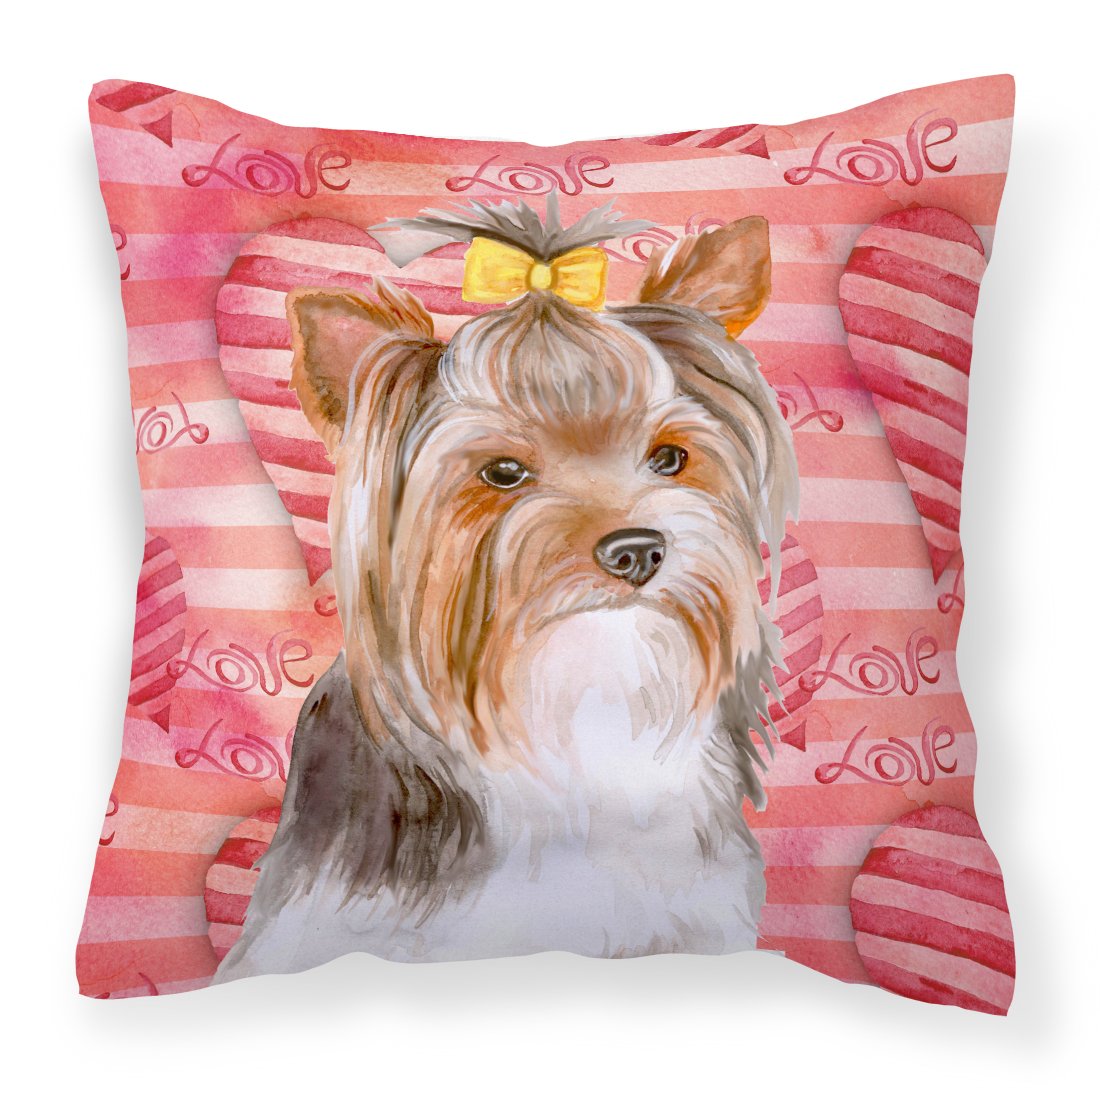 Yorkshire Terrier #2 Love Fabric Decorative Pillow BB9810PW1818 by Caroline's Treasures